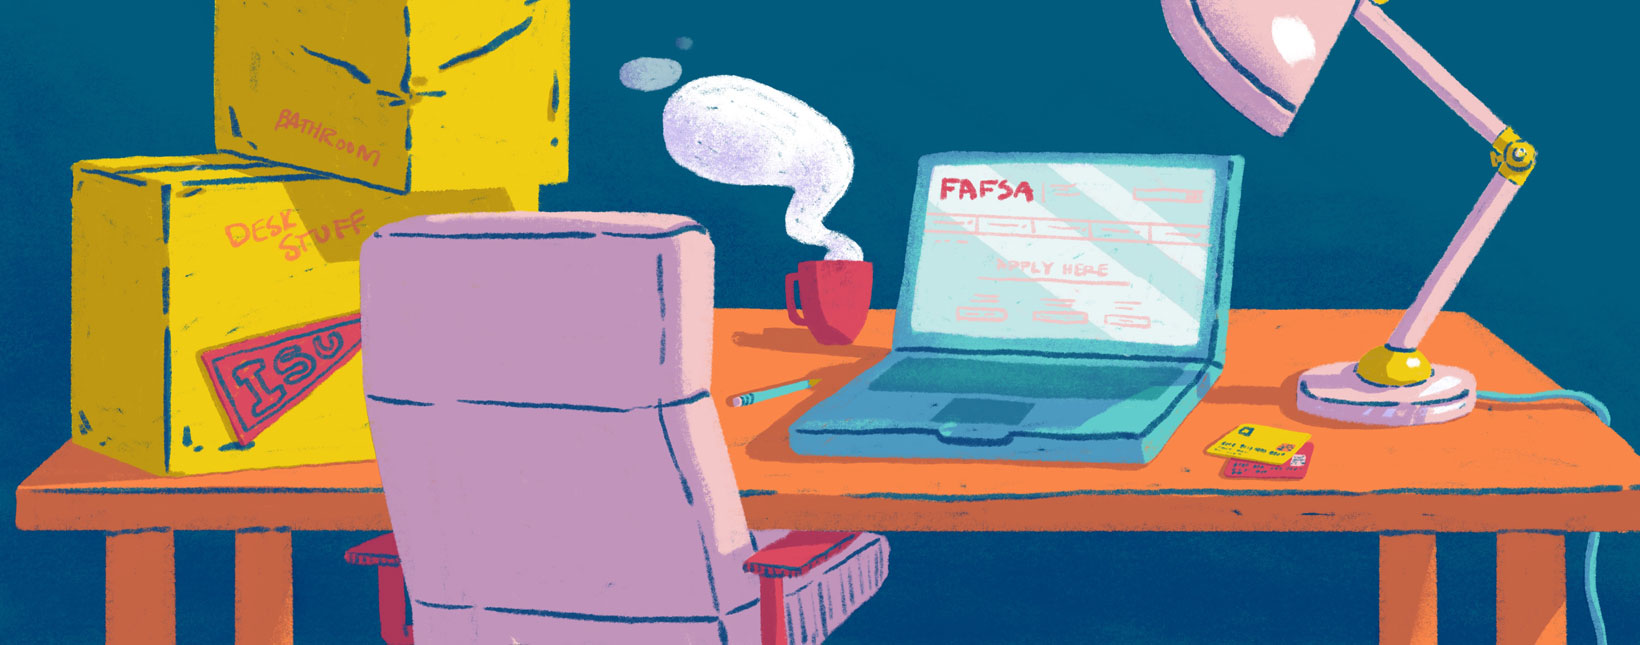 illustration of computer with FAFSA on screen